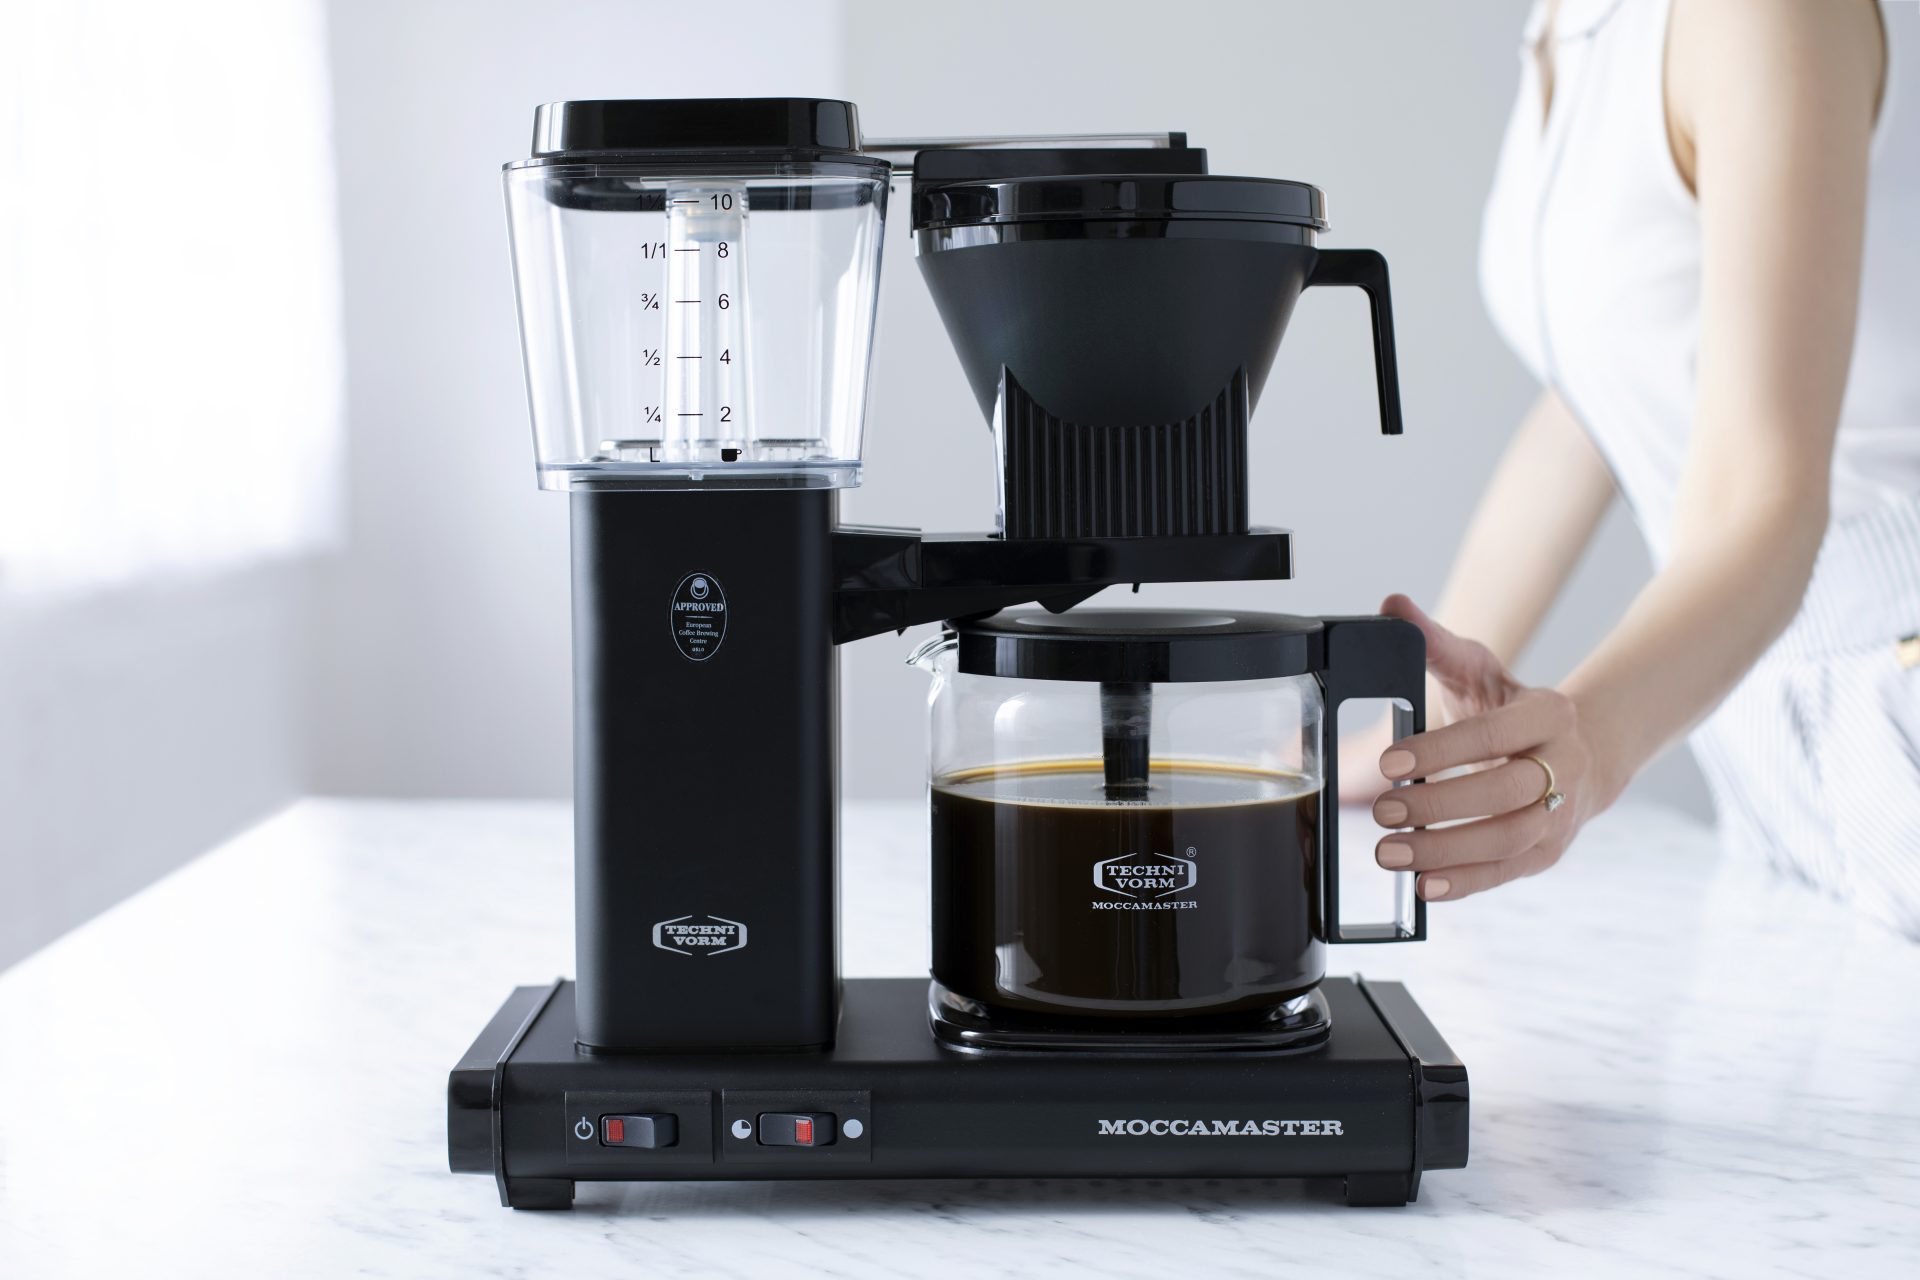 11 Best Coffee Makers of 2022 - Top-Rated Coffee Makers to Buy